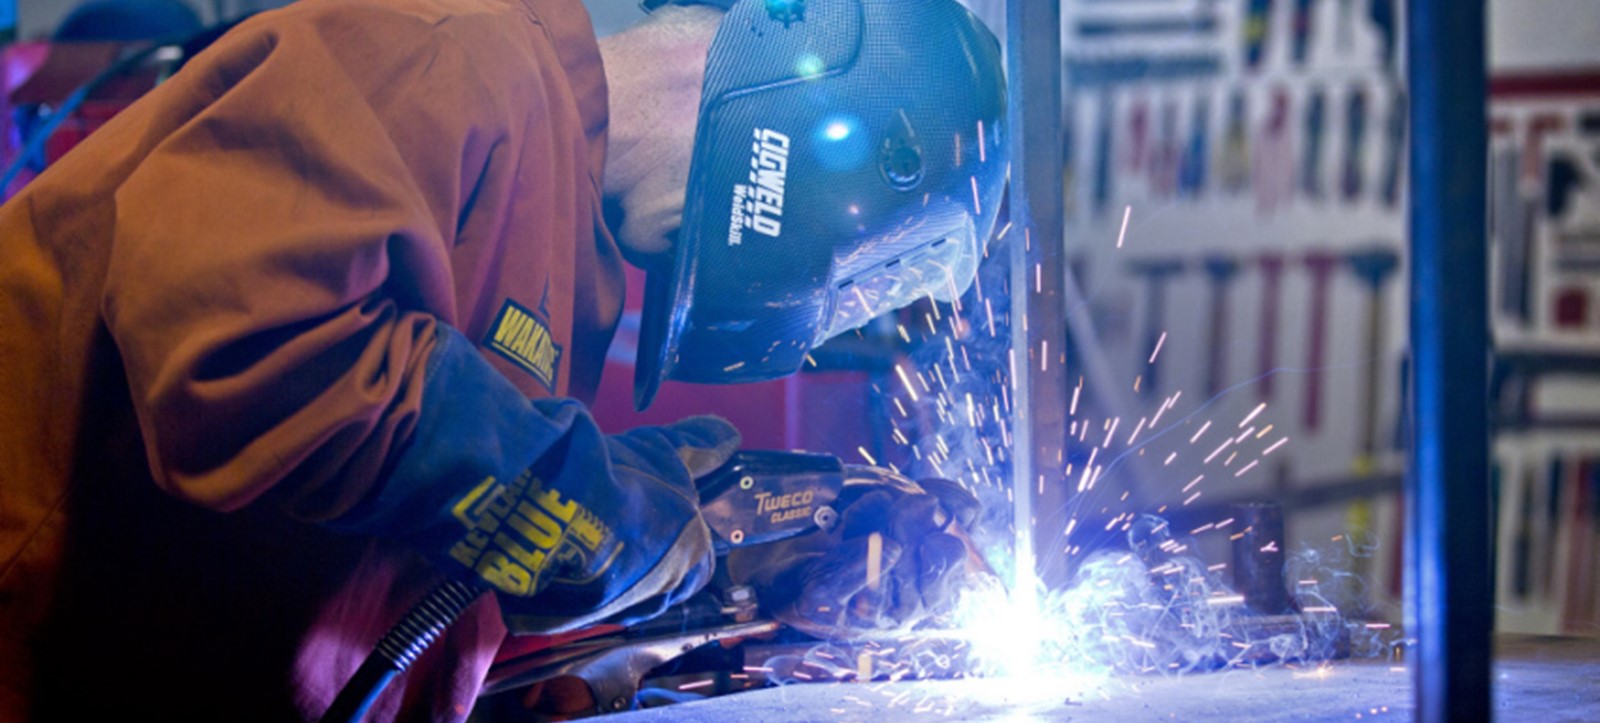 Student welding at a technical college